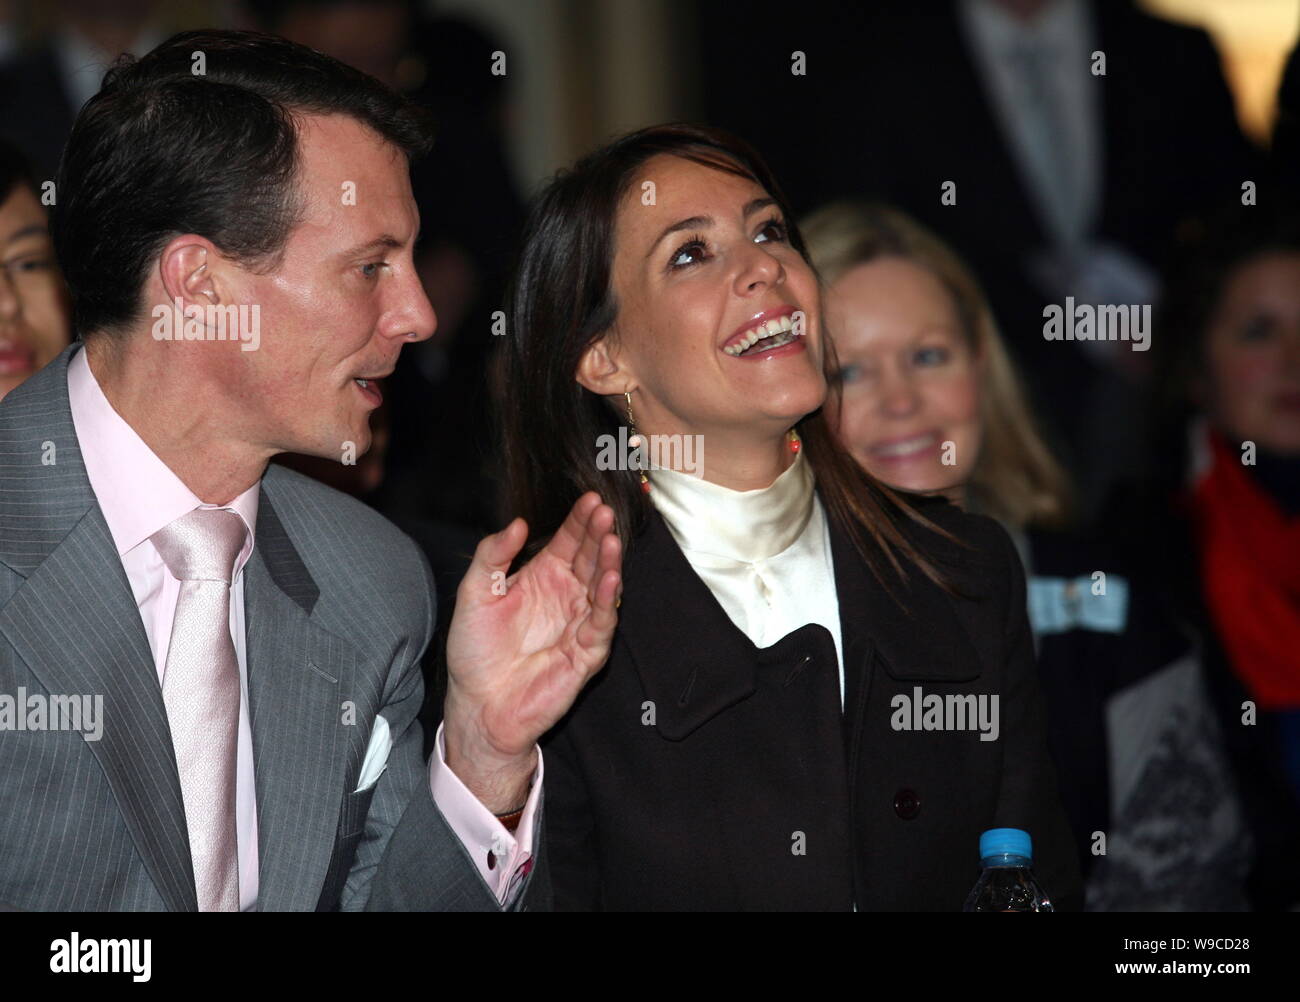 Prince Joachim, front left, talk to Princess Marie, front right, of Denmark during a promotional event entitled Danish Fairytales in China for Danish Stock Photo